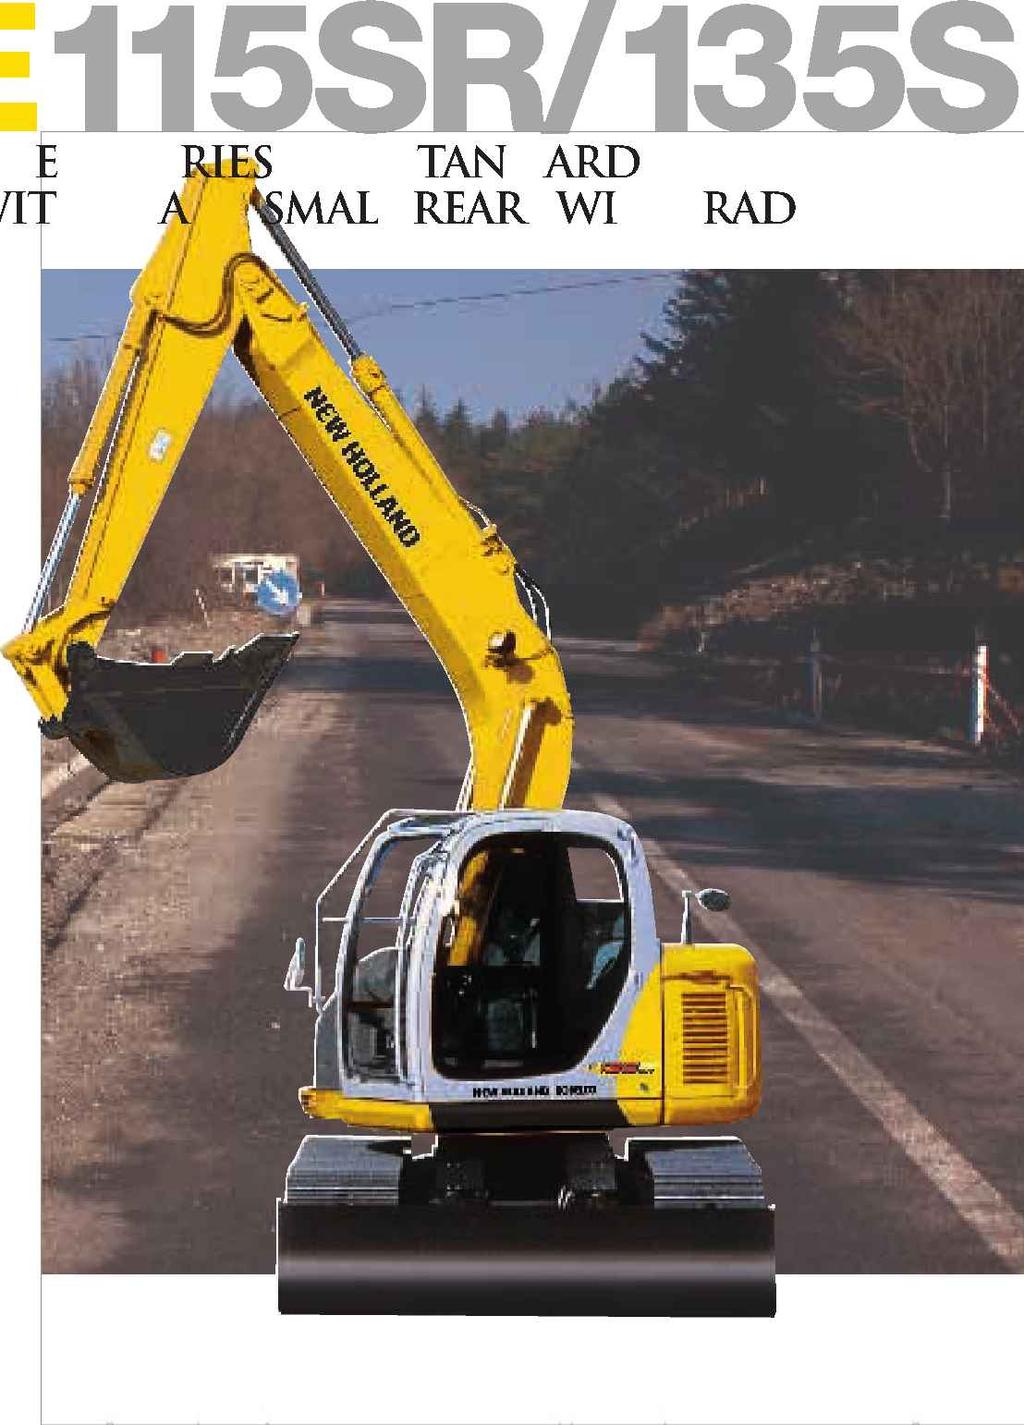 I I I TH SR SERIES: THE STANDARD FOR OPERATION WI HIN A SMALL REAR SWING RADIUS 1:-----A \.14.